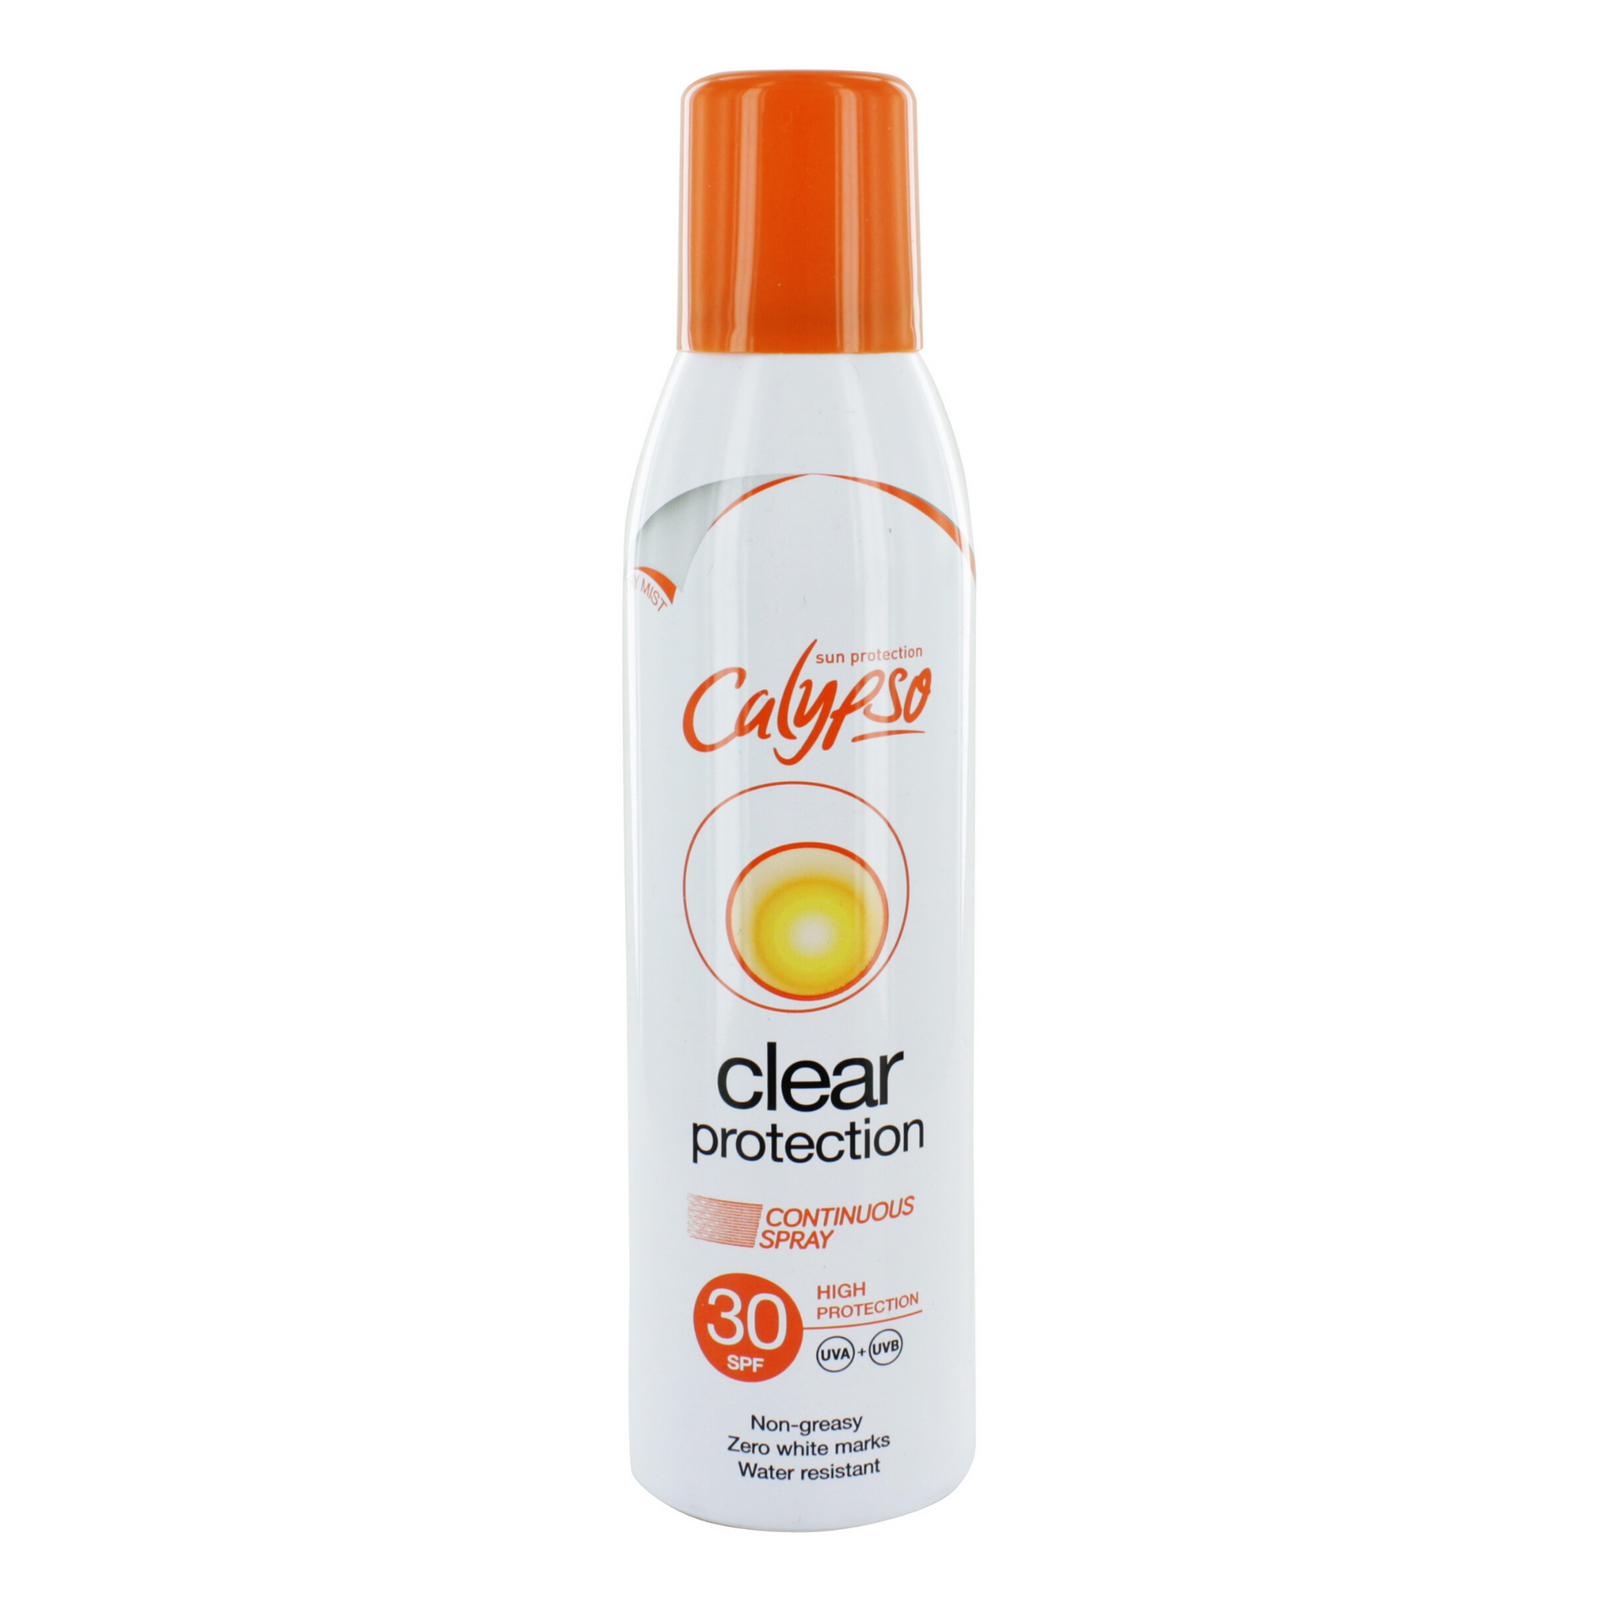 Clear Protection Spray SPF 30